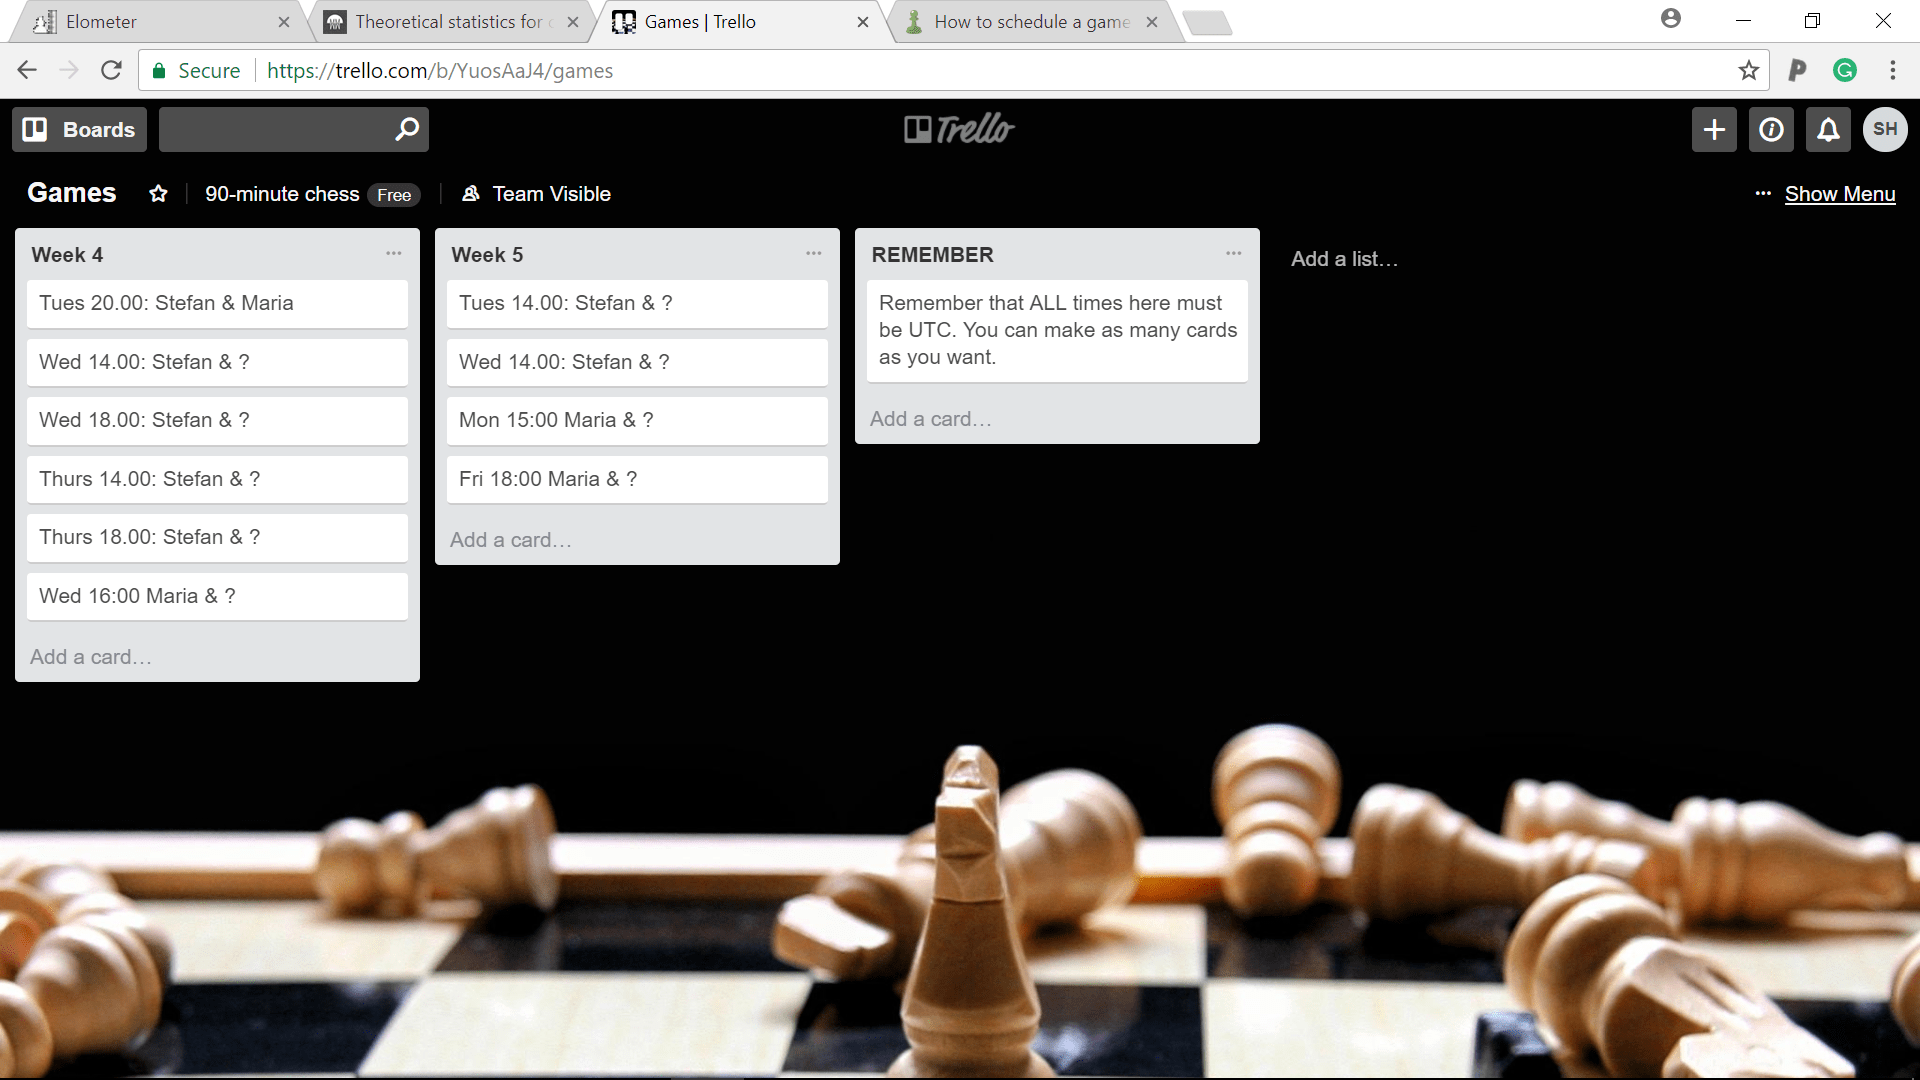 How do you play a timed game against the computer? (10 minutes for example)  - Chess Forums 